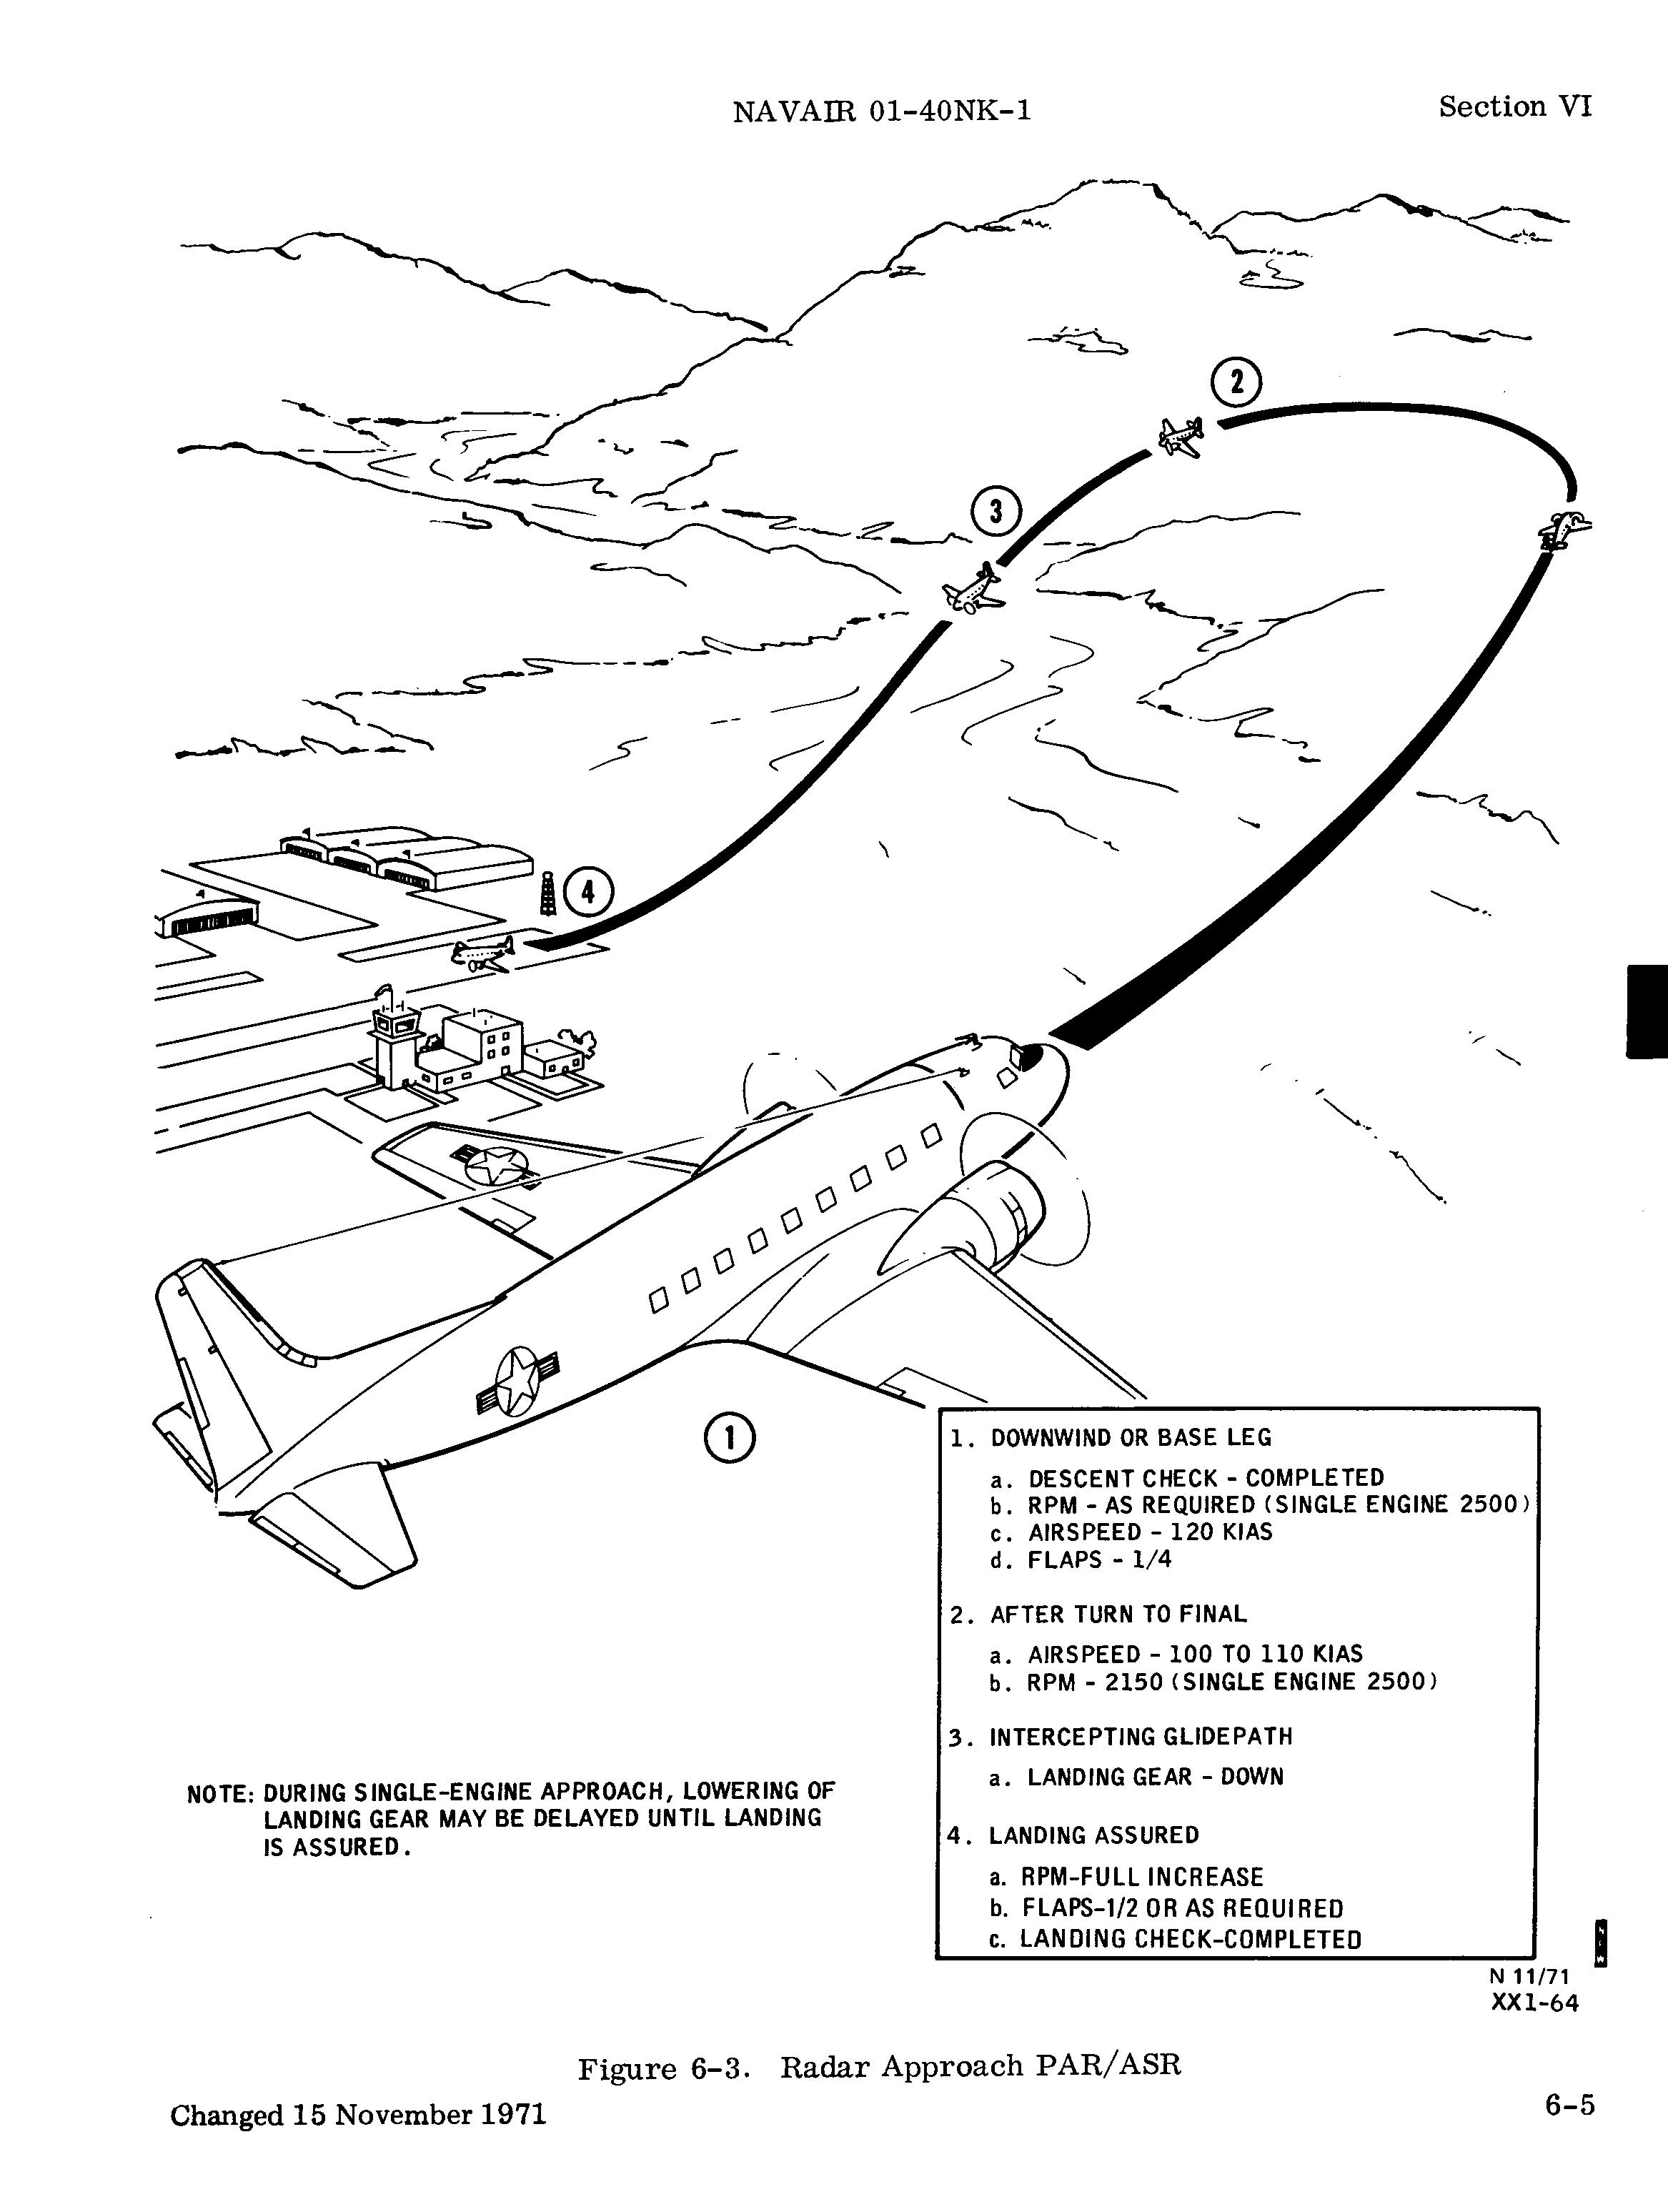 Sample page 155 from AirCorps Library document: NATOPS Flight Manual for Navy Model C-117D Aircraft